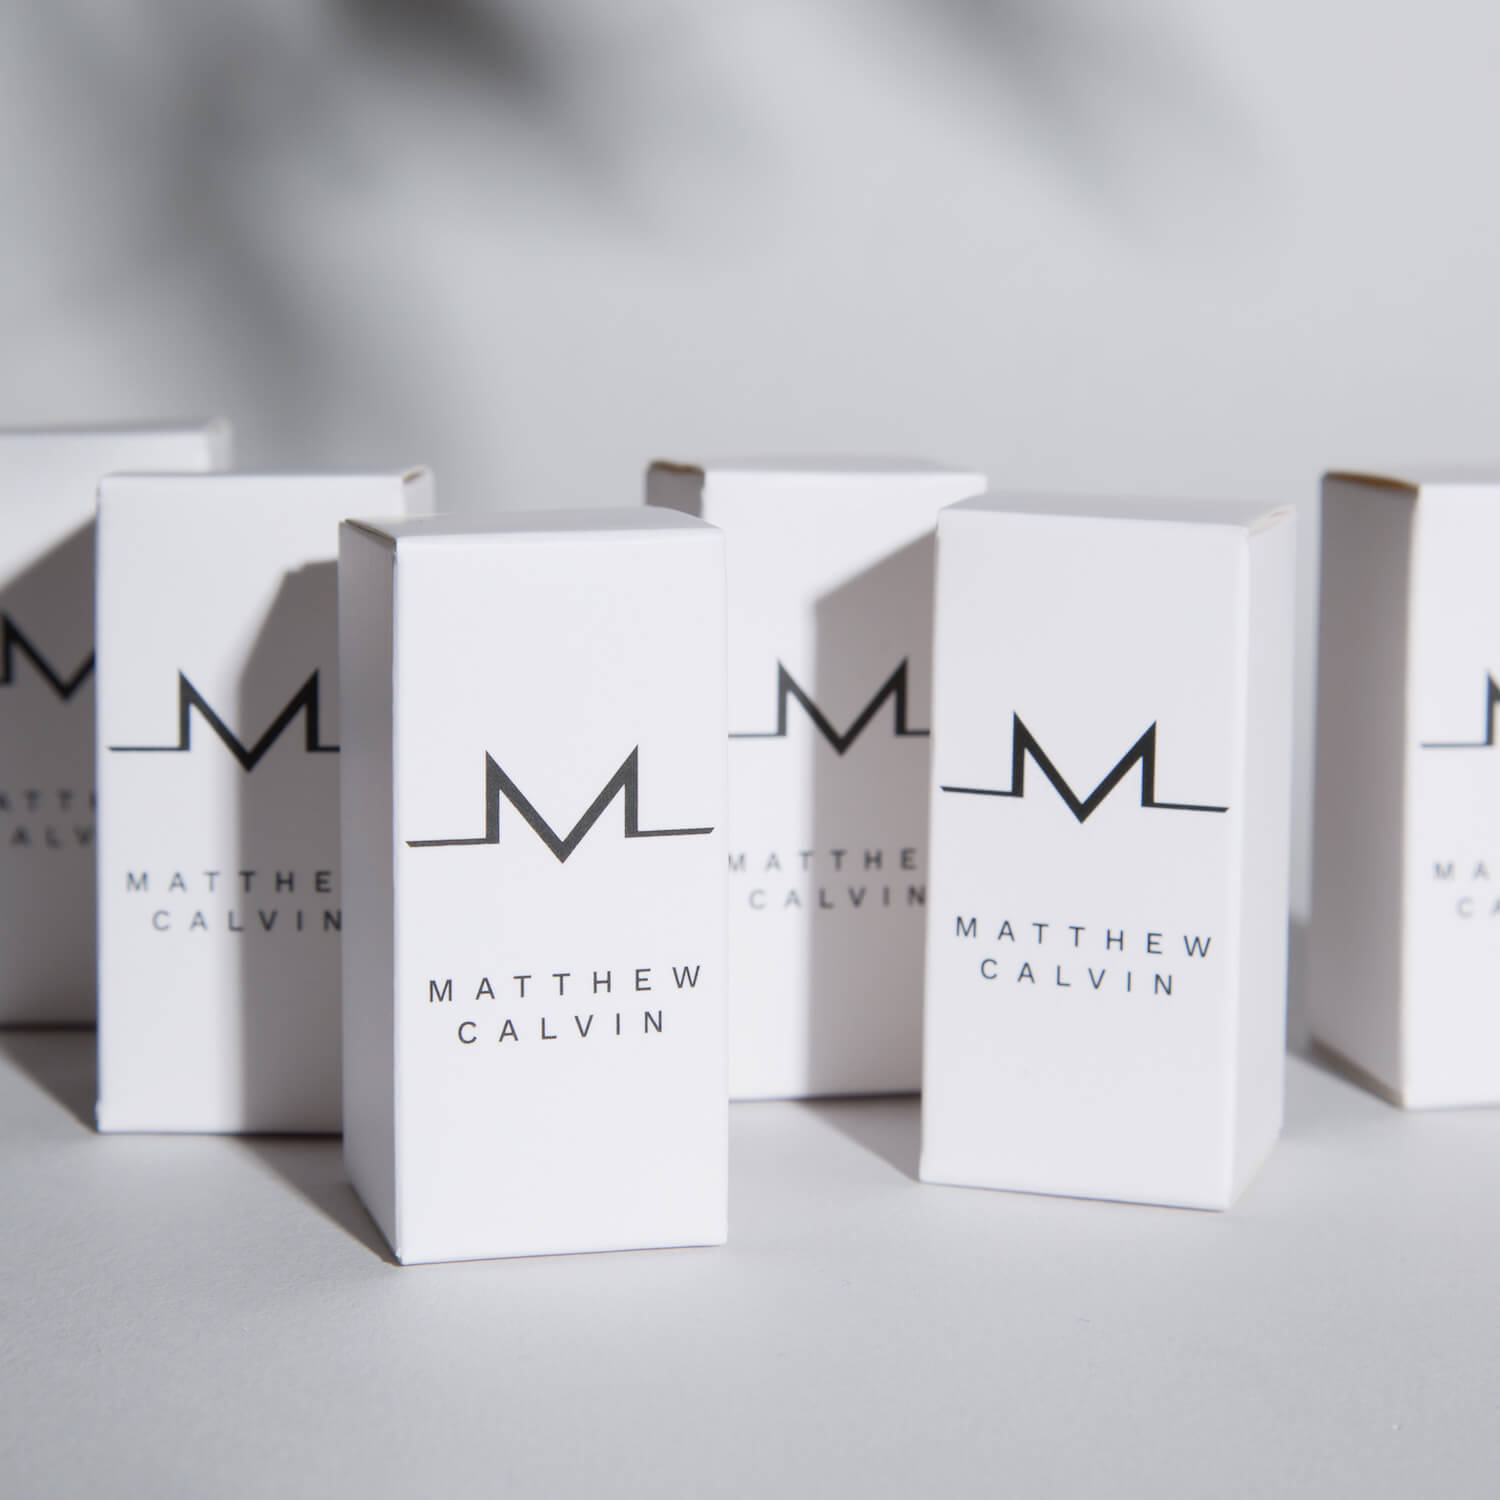 Small white boxes for earrings with Matthew Calvin written on them